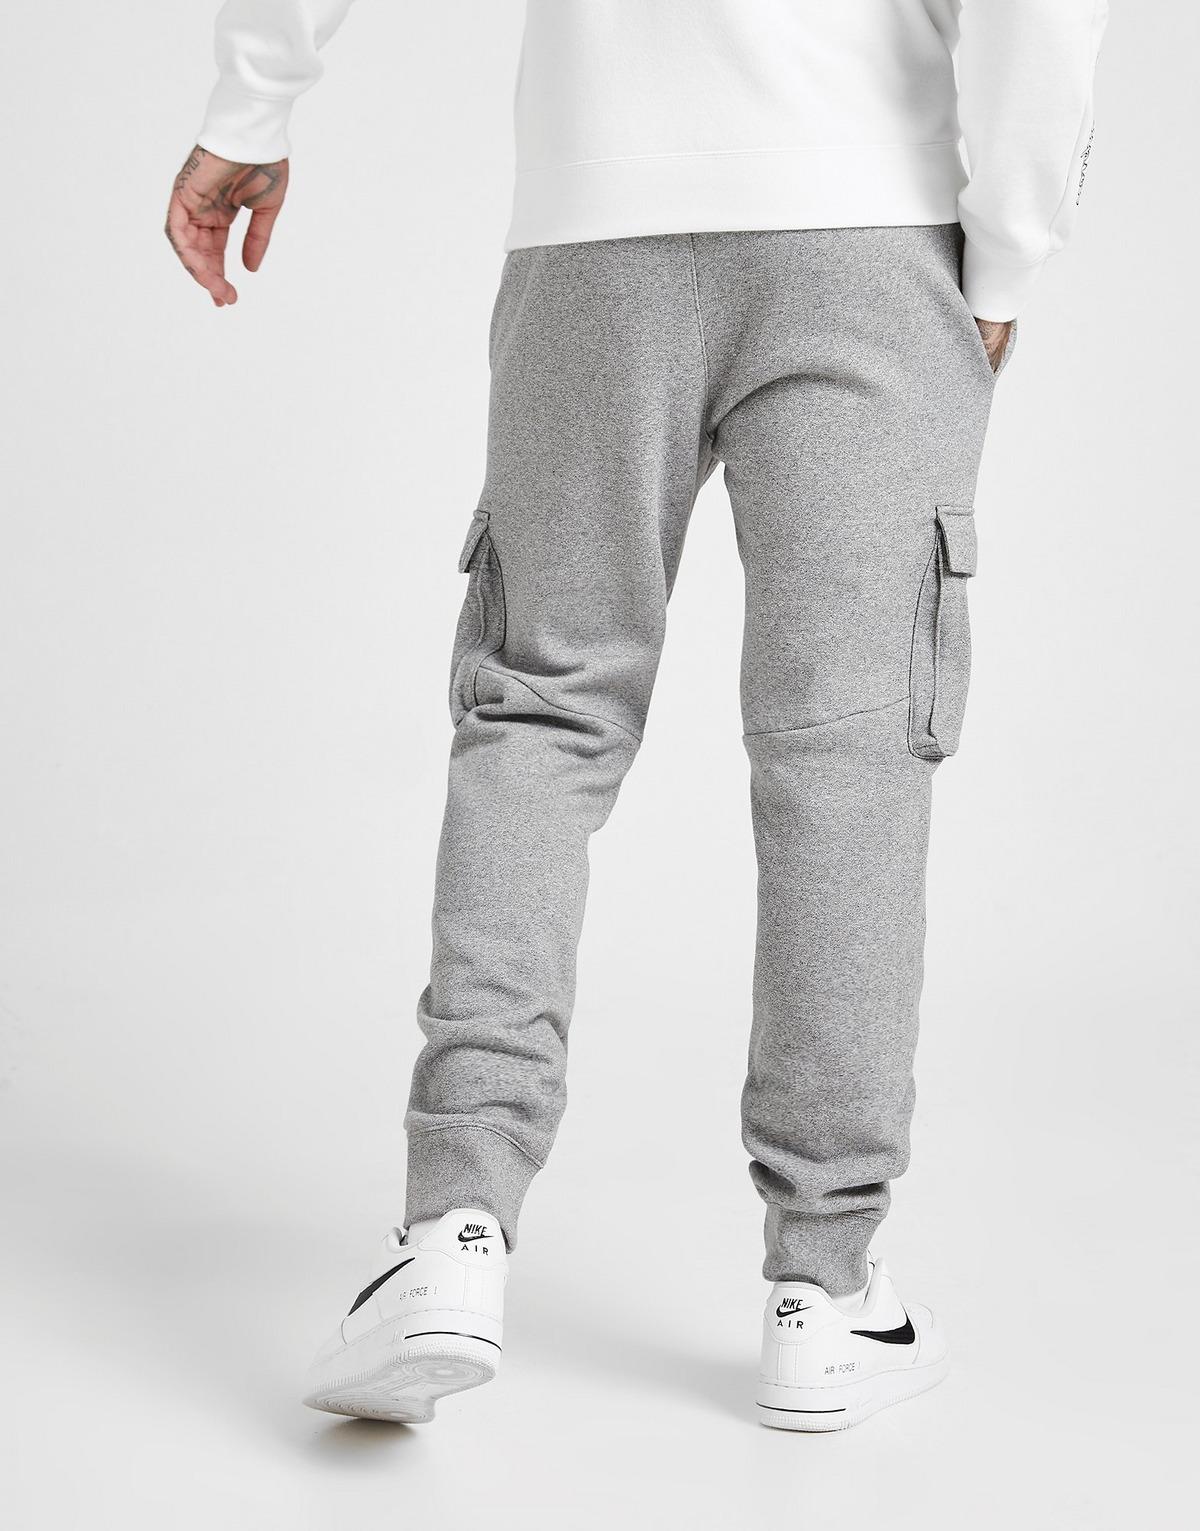 Champion Cotton Cargo Joggers in Grey (Gray) for Men - Lyst